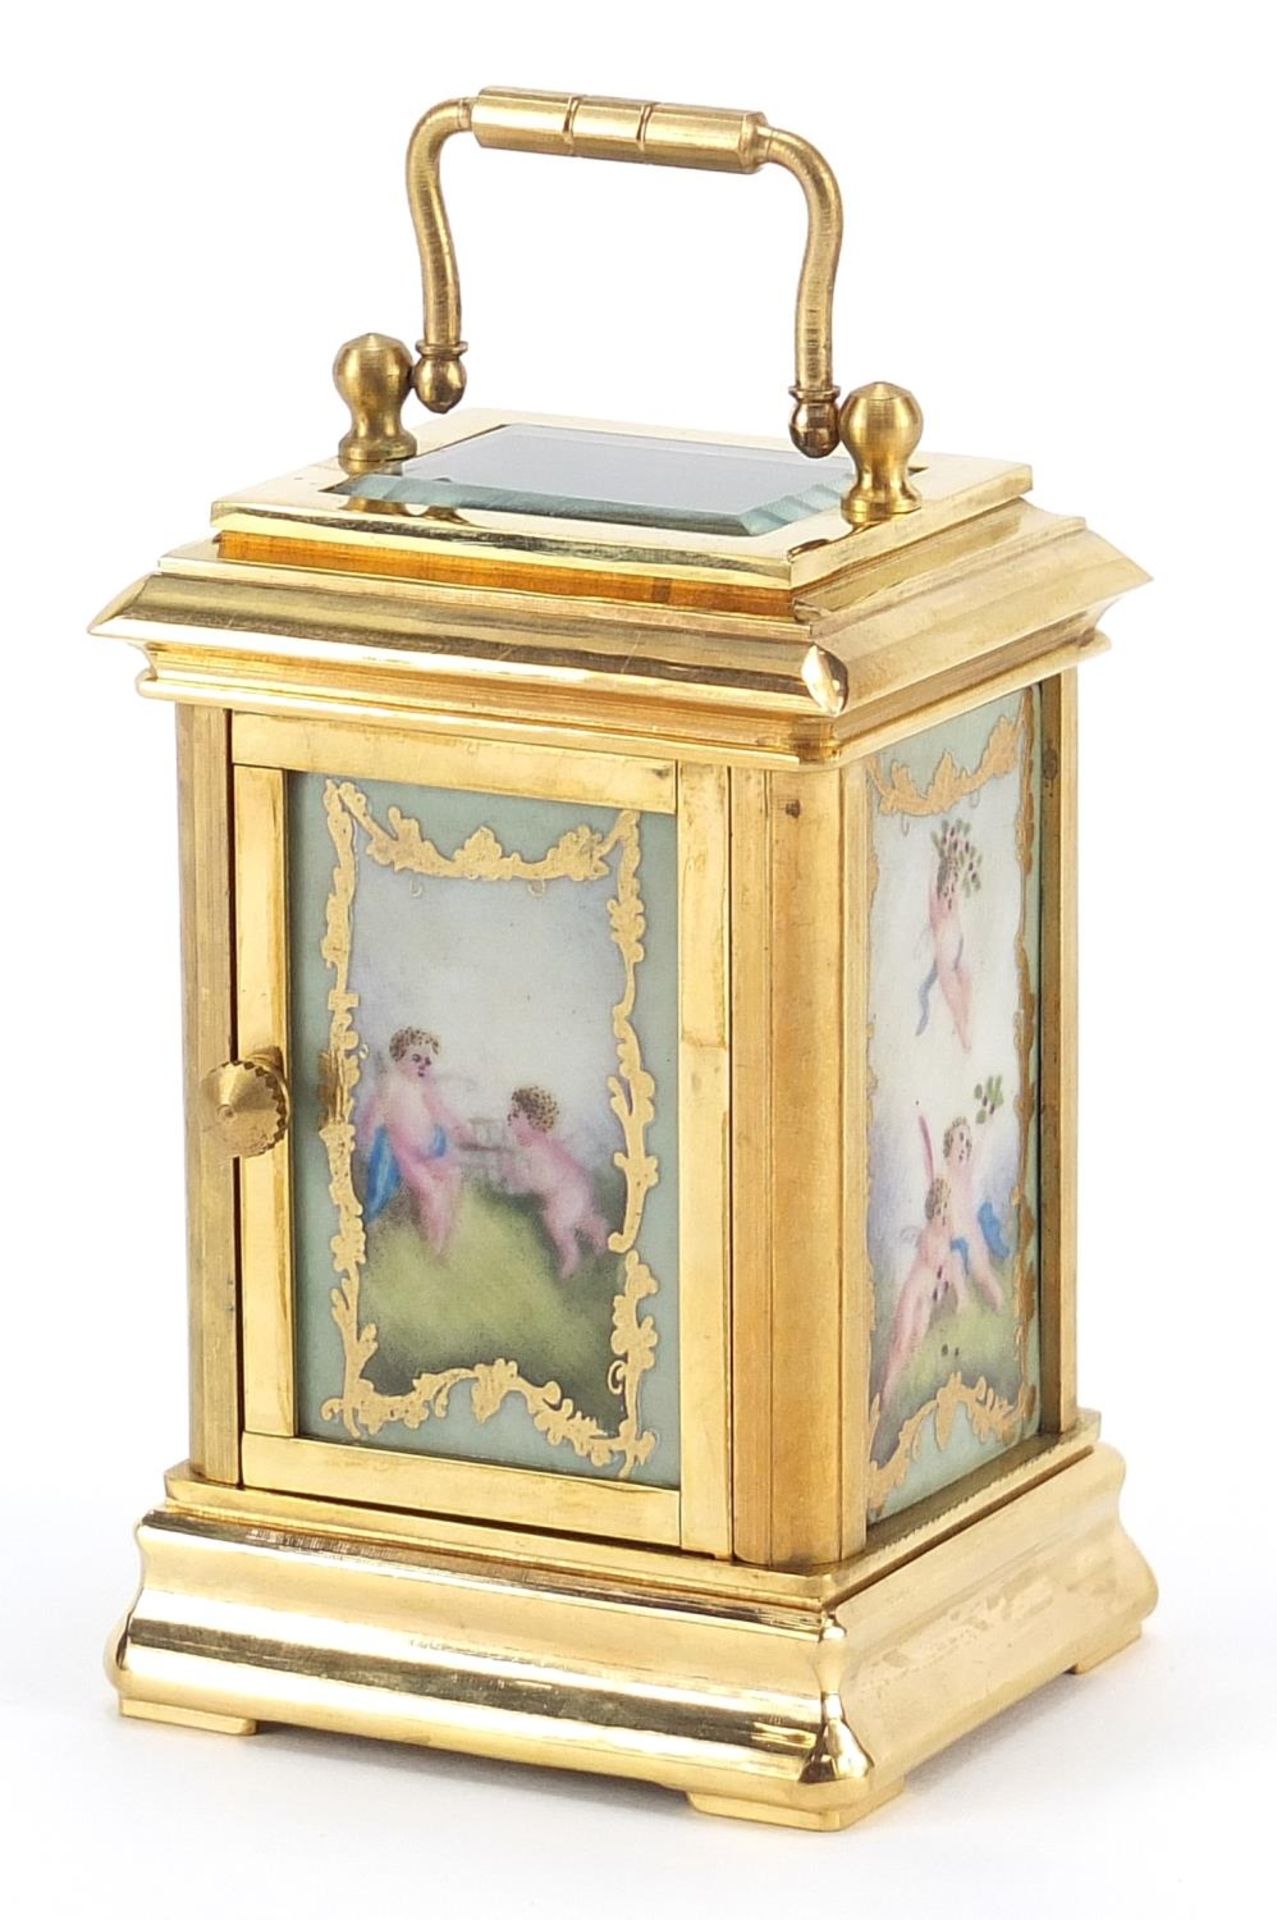 Miniature brass cased carriage clock with Sevres style panels and swing handle, 8cm high - Image 2 of 4